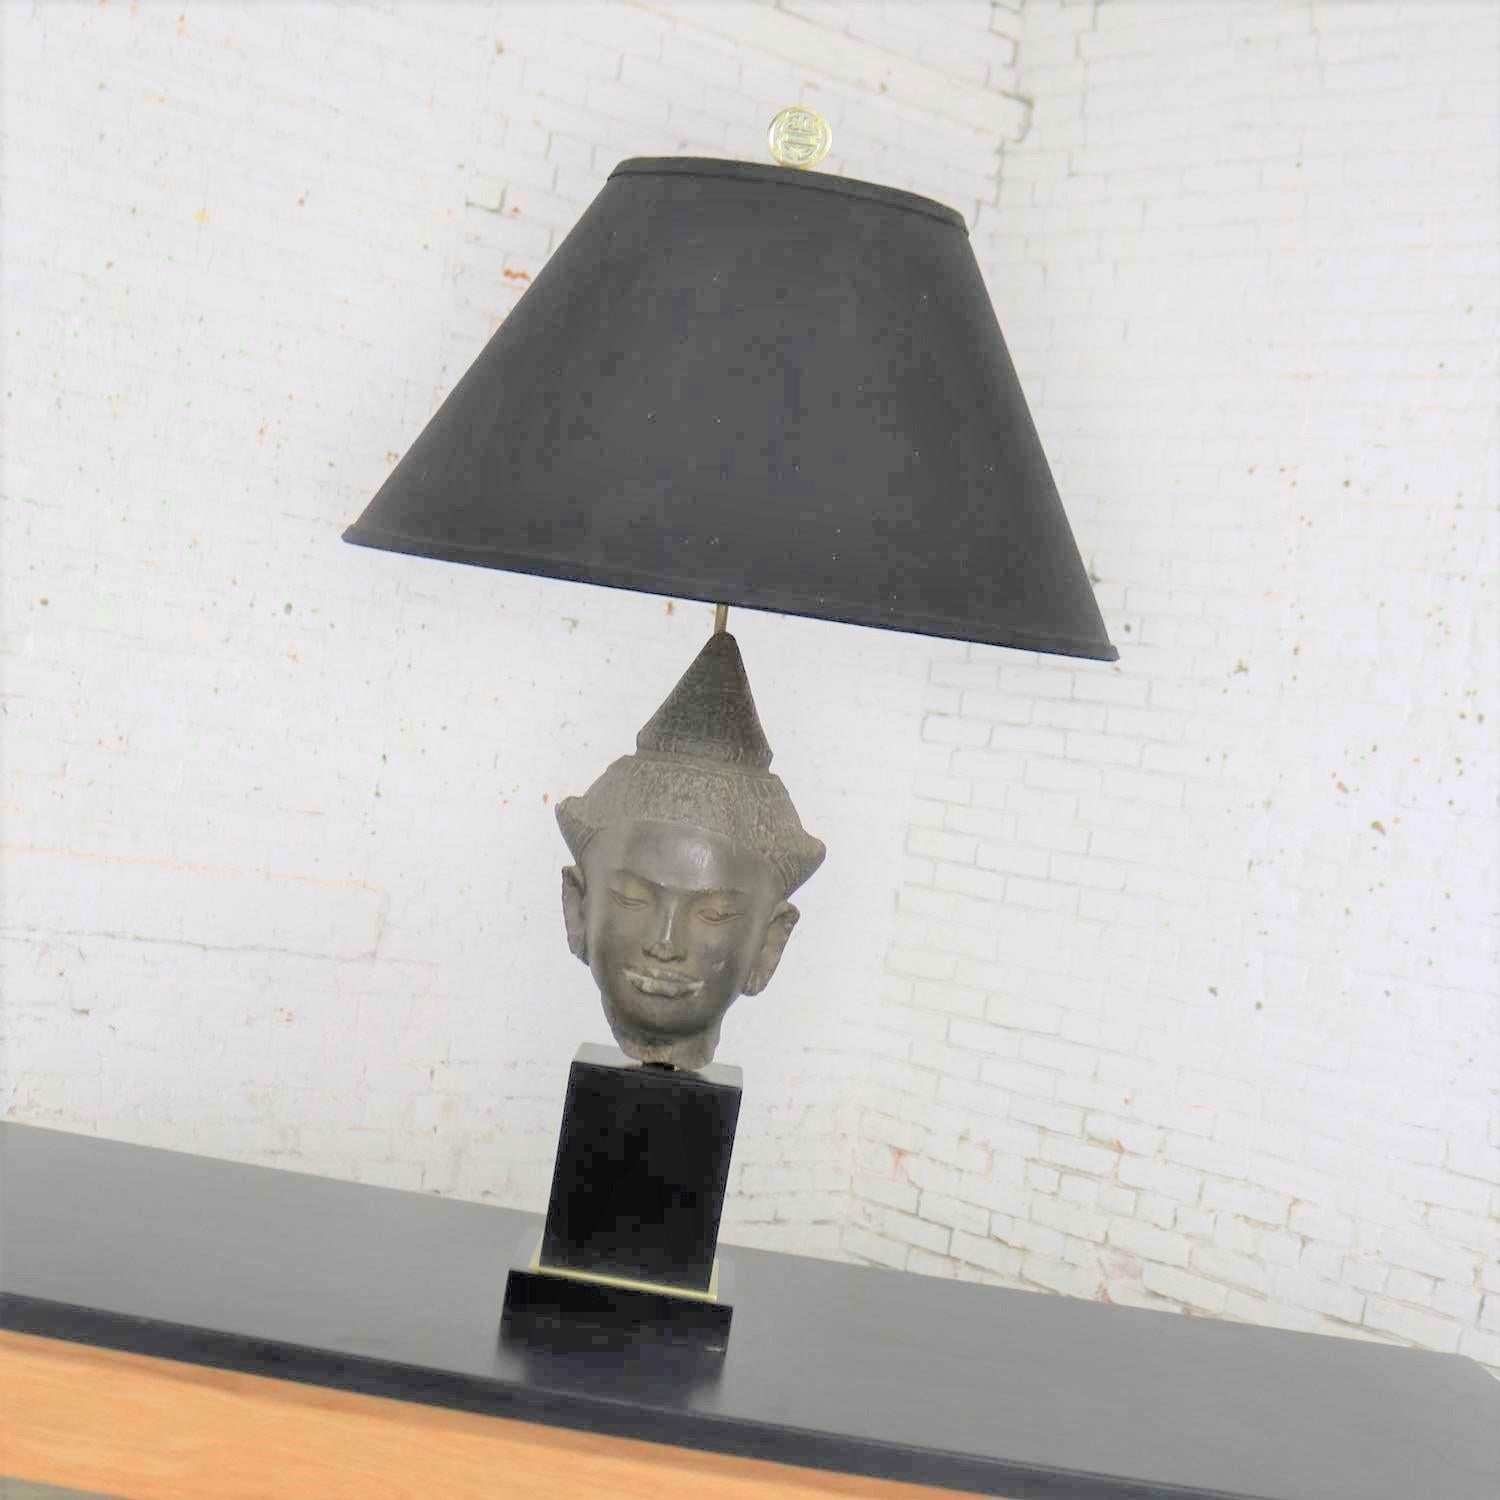 Handsome Hollywood Regency Buddha head table lamp by Paul Hanson. It is in fabulous restored condition including a new wiring. It is ready to plug in and use. The original vintage hard fabric shade is offered here and in good condition. However, we